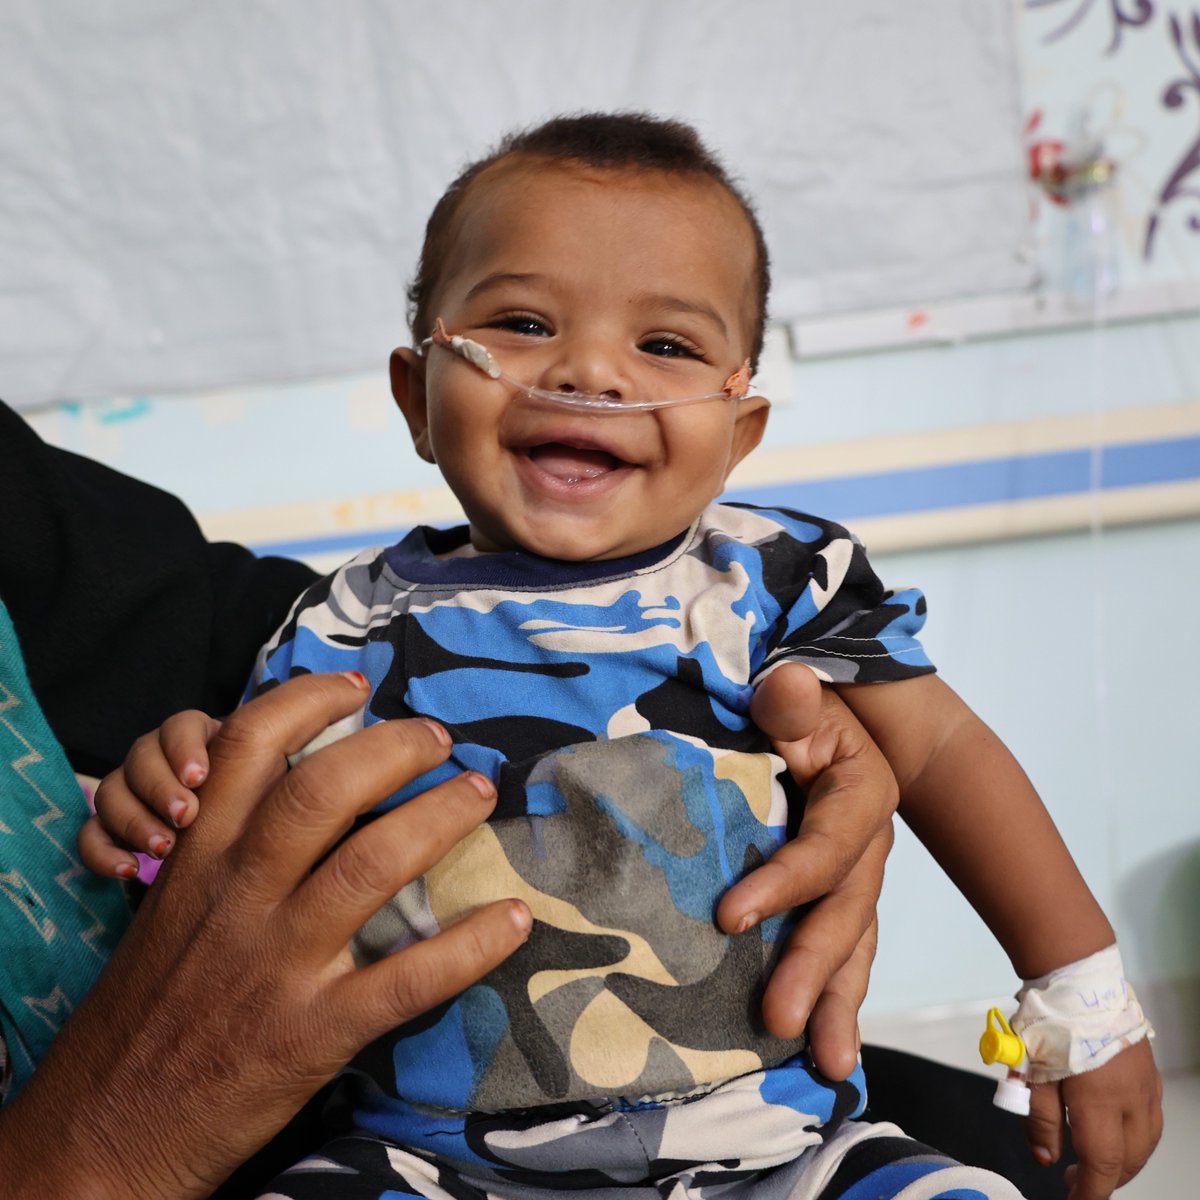 ✨Some cuteness for your feed ✨ Meet Ahmed 👋 an adorable six-month-old from Az Zuhra district, Yemen. Ahmed was diagnosed with pneumonia at our paediatric ward in the Mother and Child Hospital in Al-Qanawis. After five days of receiving treatment, he’s feeling much better 🙌